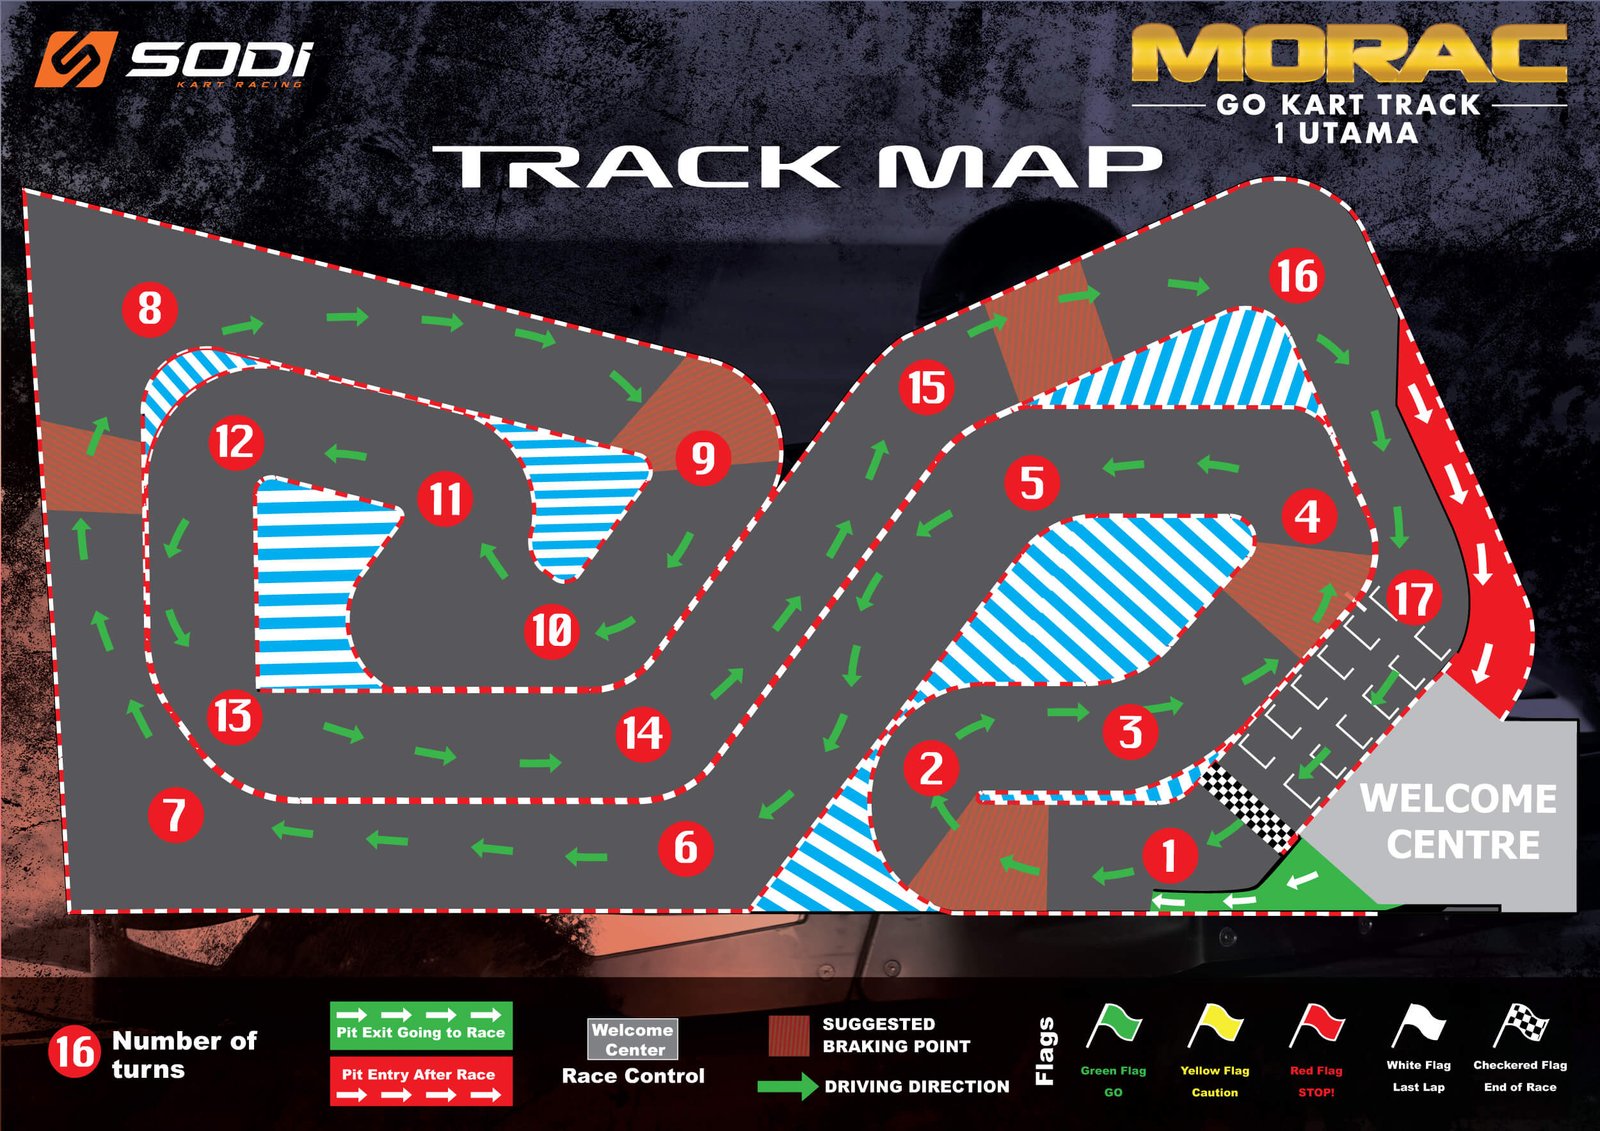 Morac Go Kart Track 1 Utama track layout showing the suggested driving line and corners